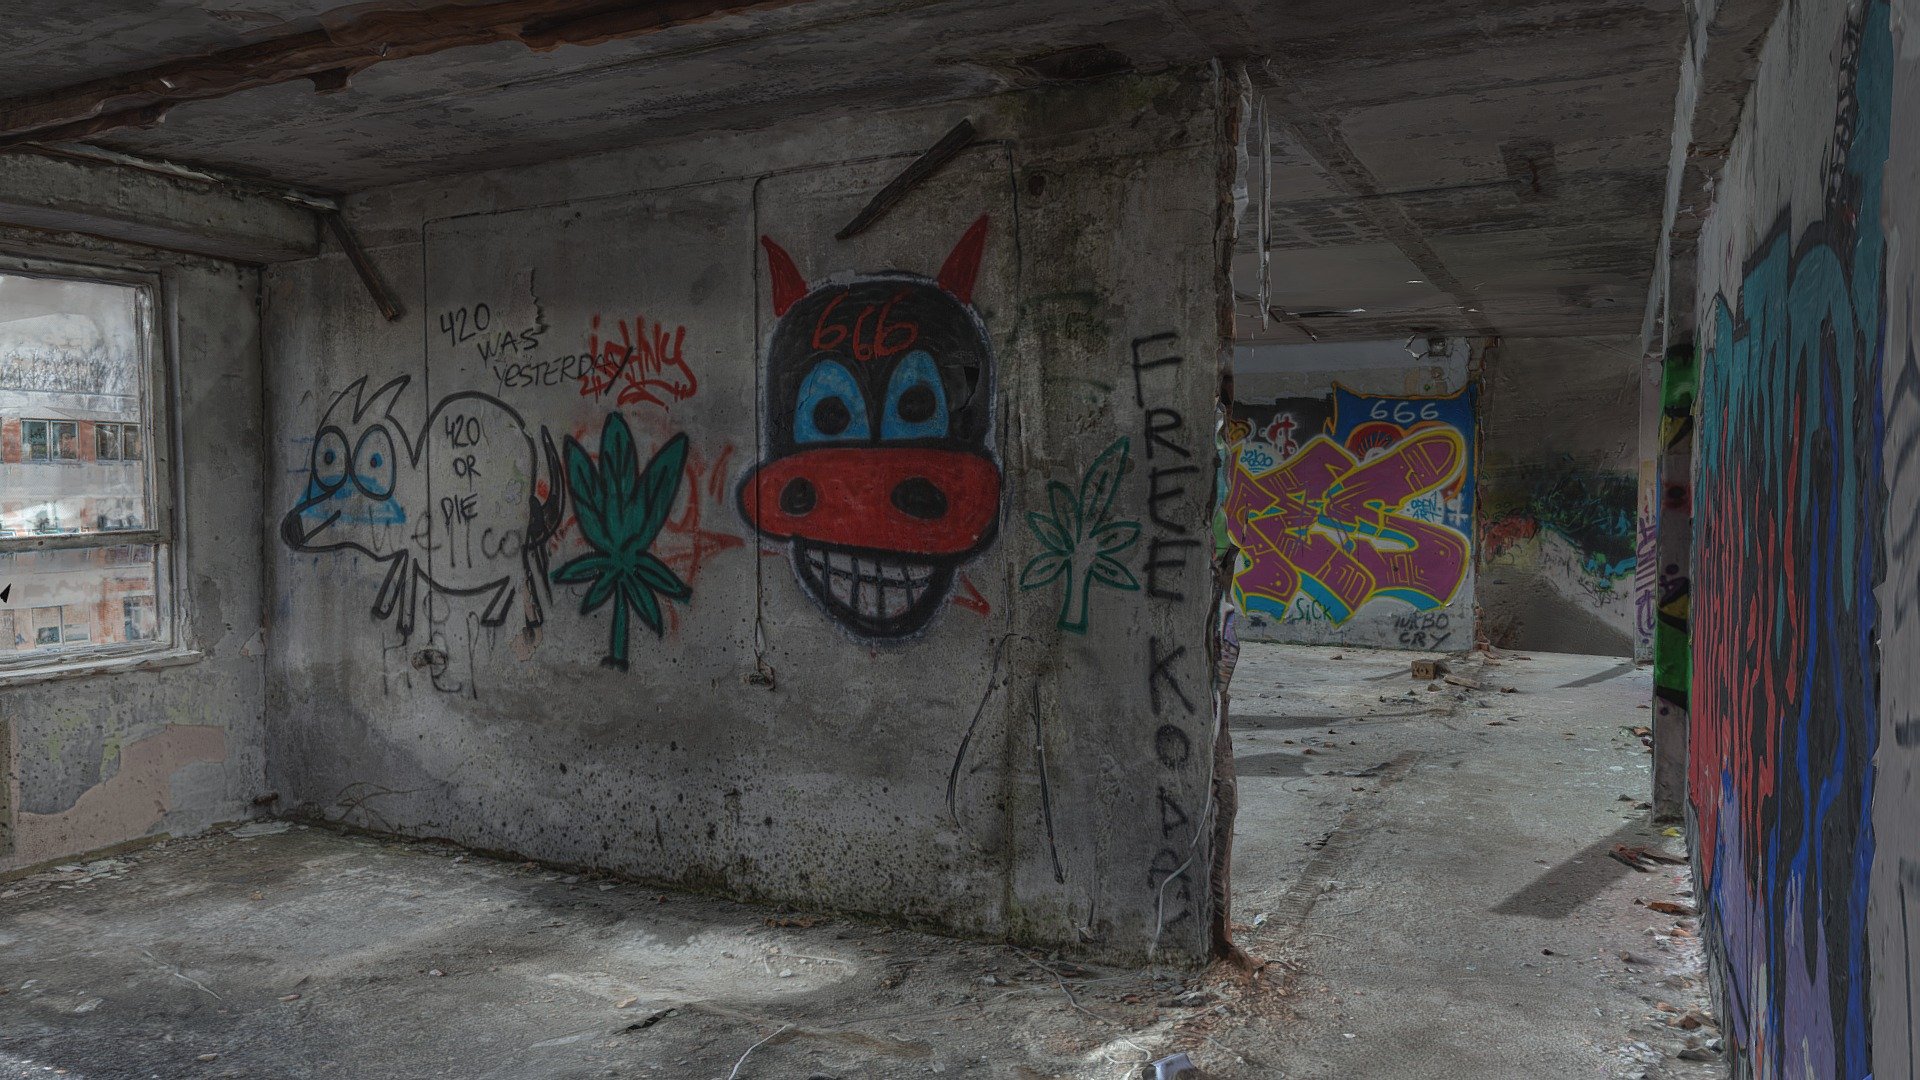 3D scan of two abandoned soviet school rooms.
Graffiti on walls, trash on ground etc. 
With normal map 3d model